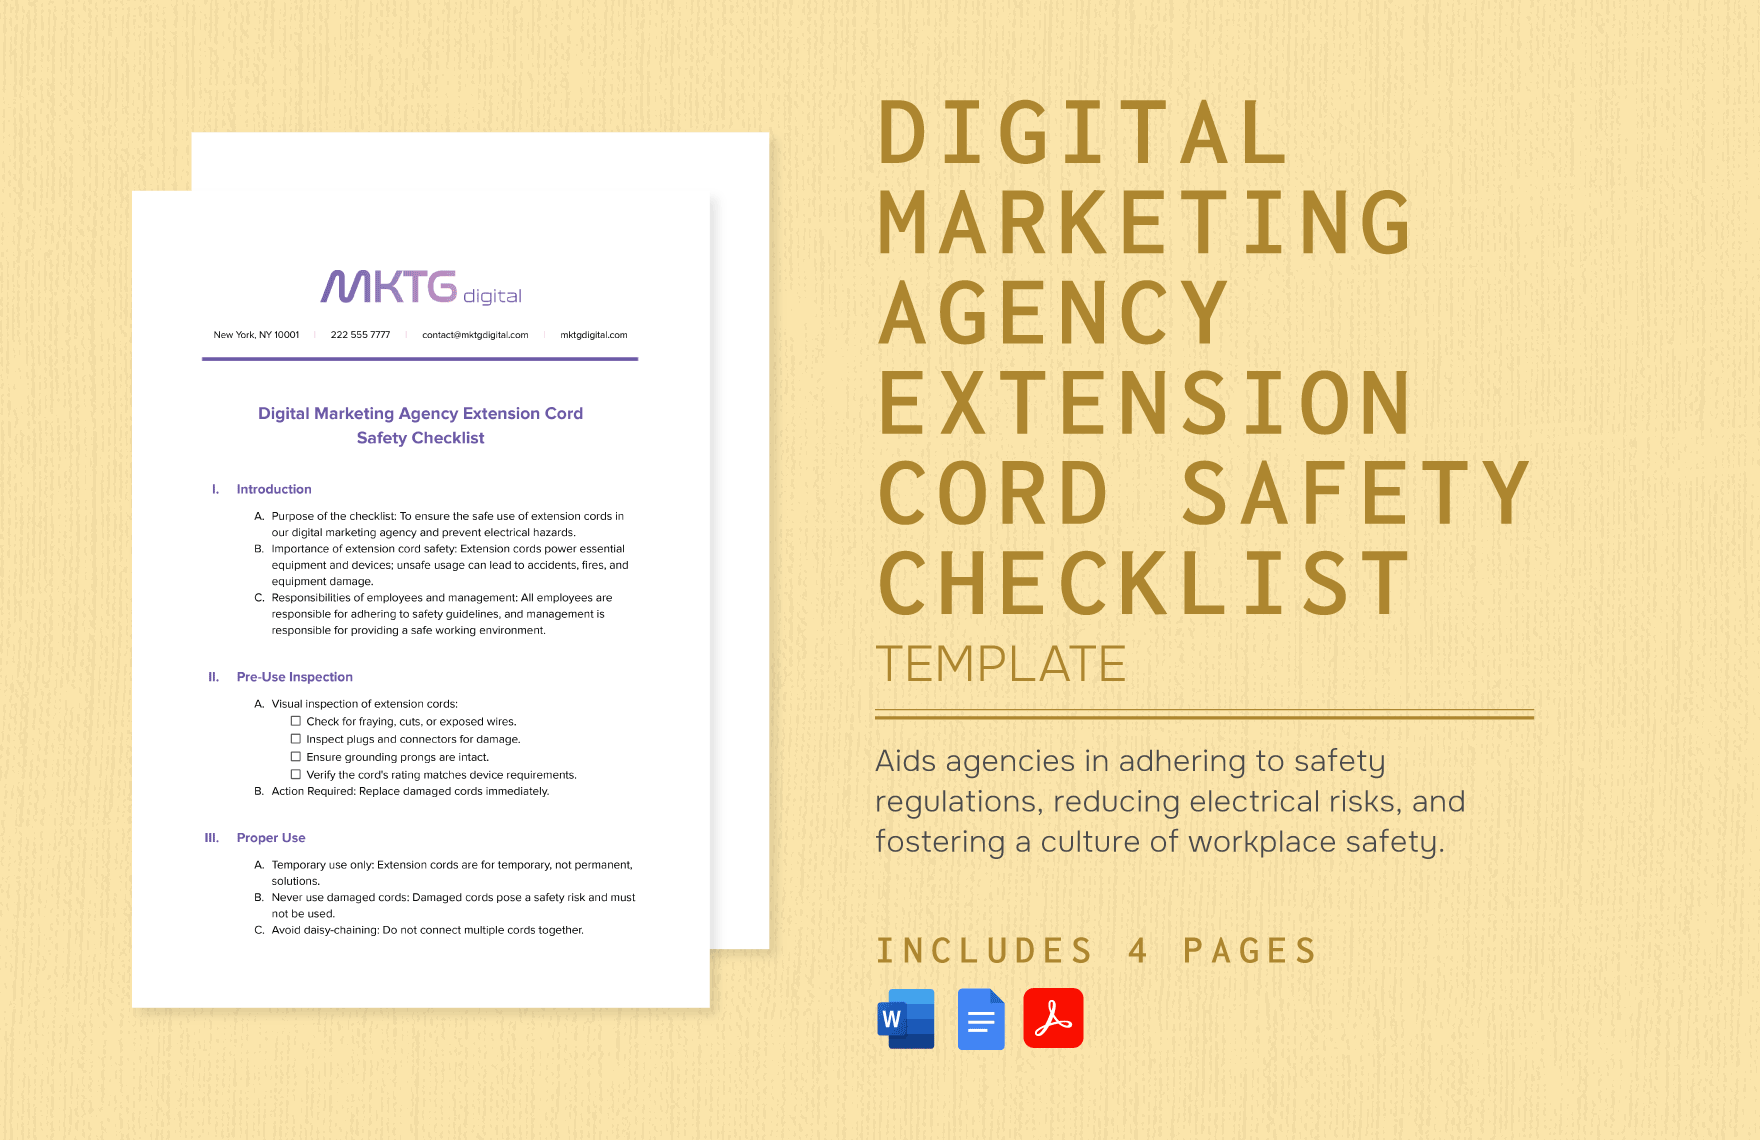 Digital Marketing Agency Extension Cord Safety Checklist Template in Word, Google Docs, PDF